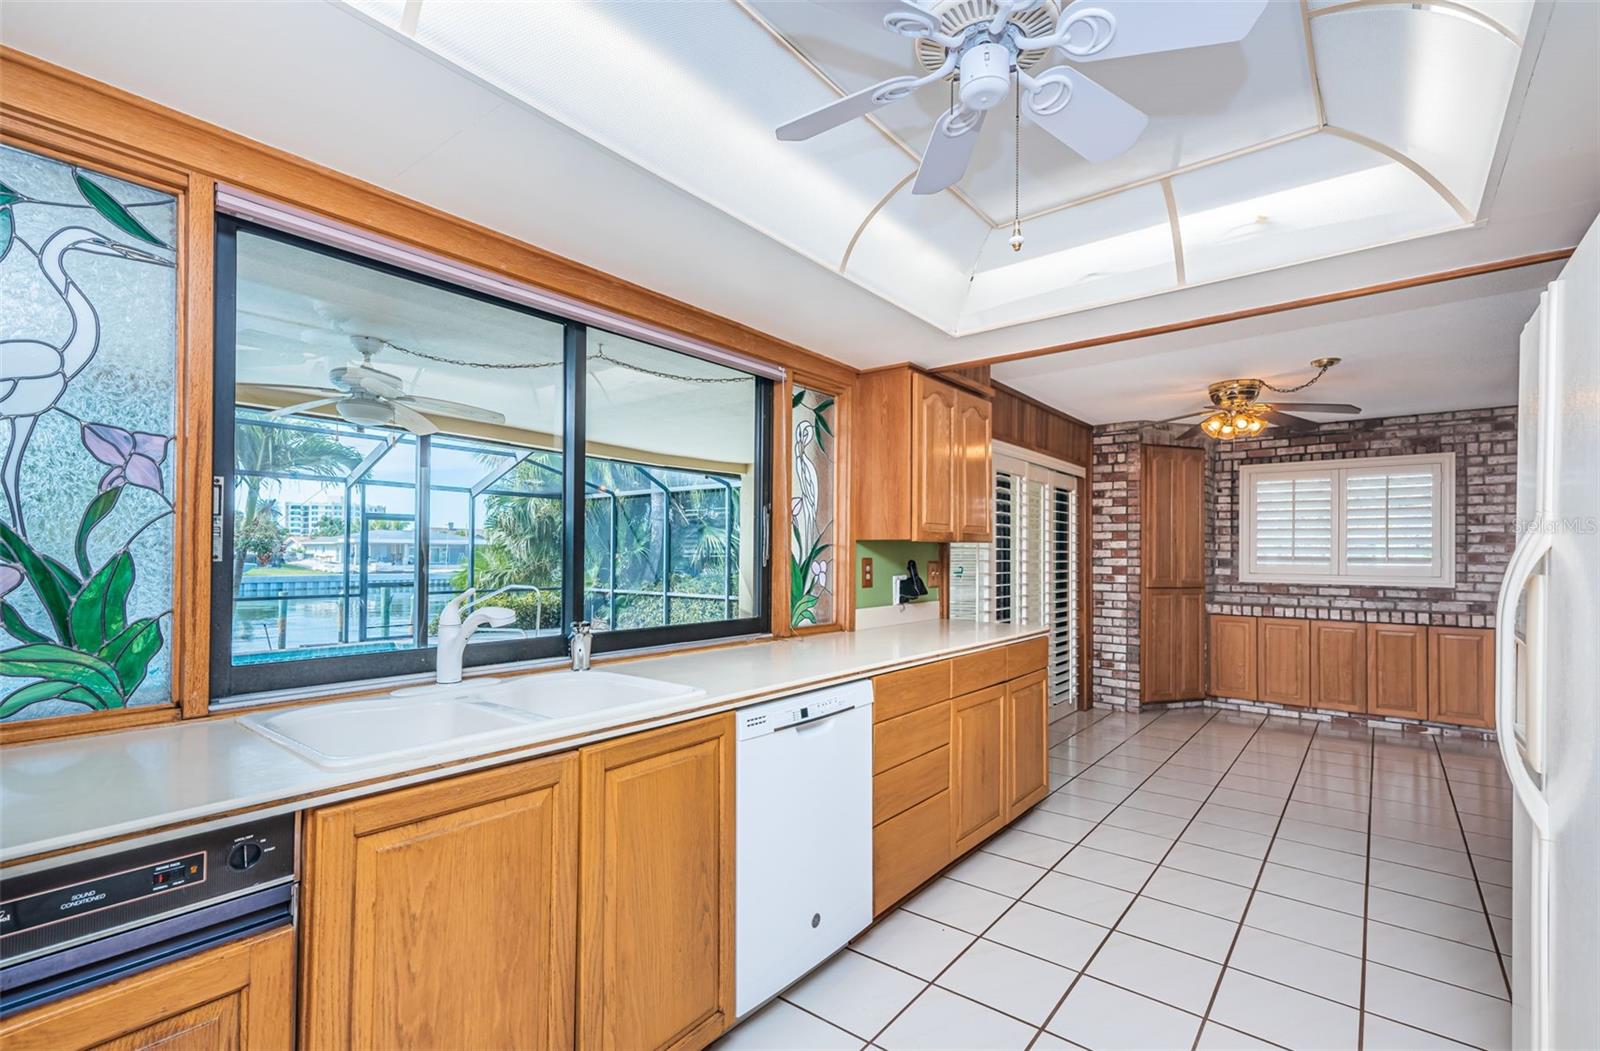 A strategically placed window offers a delightful view of the outdoor oasis while you cook.